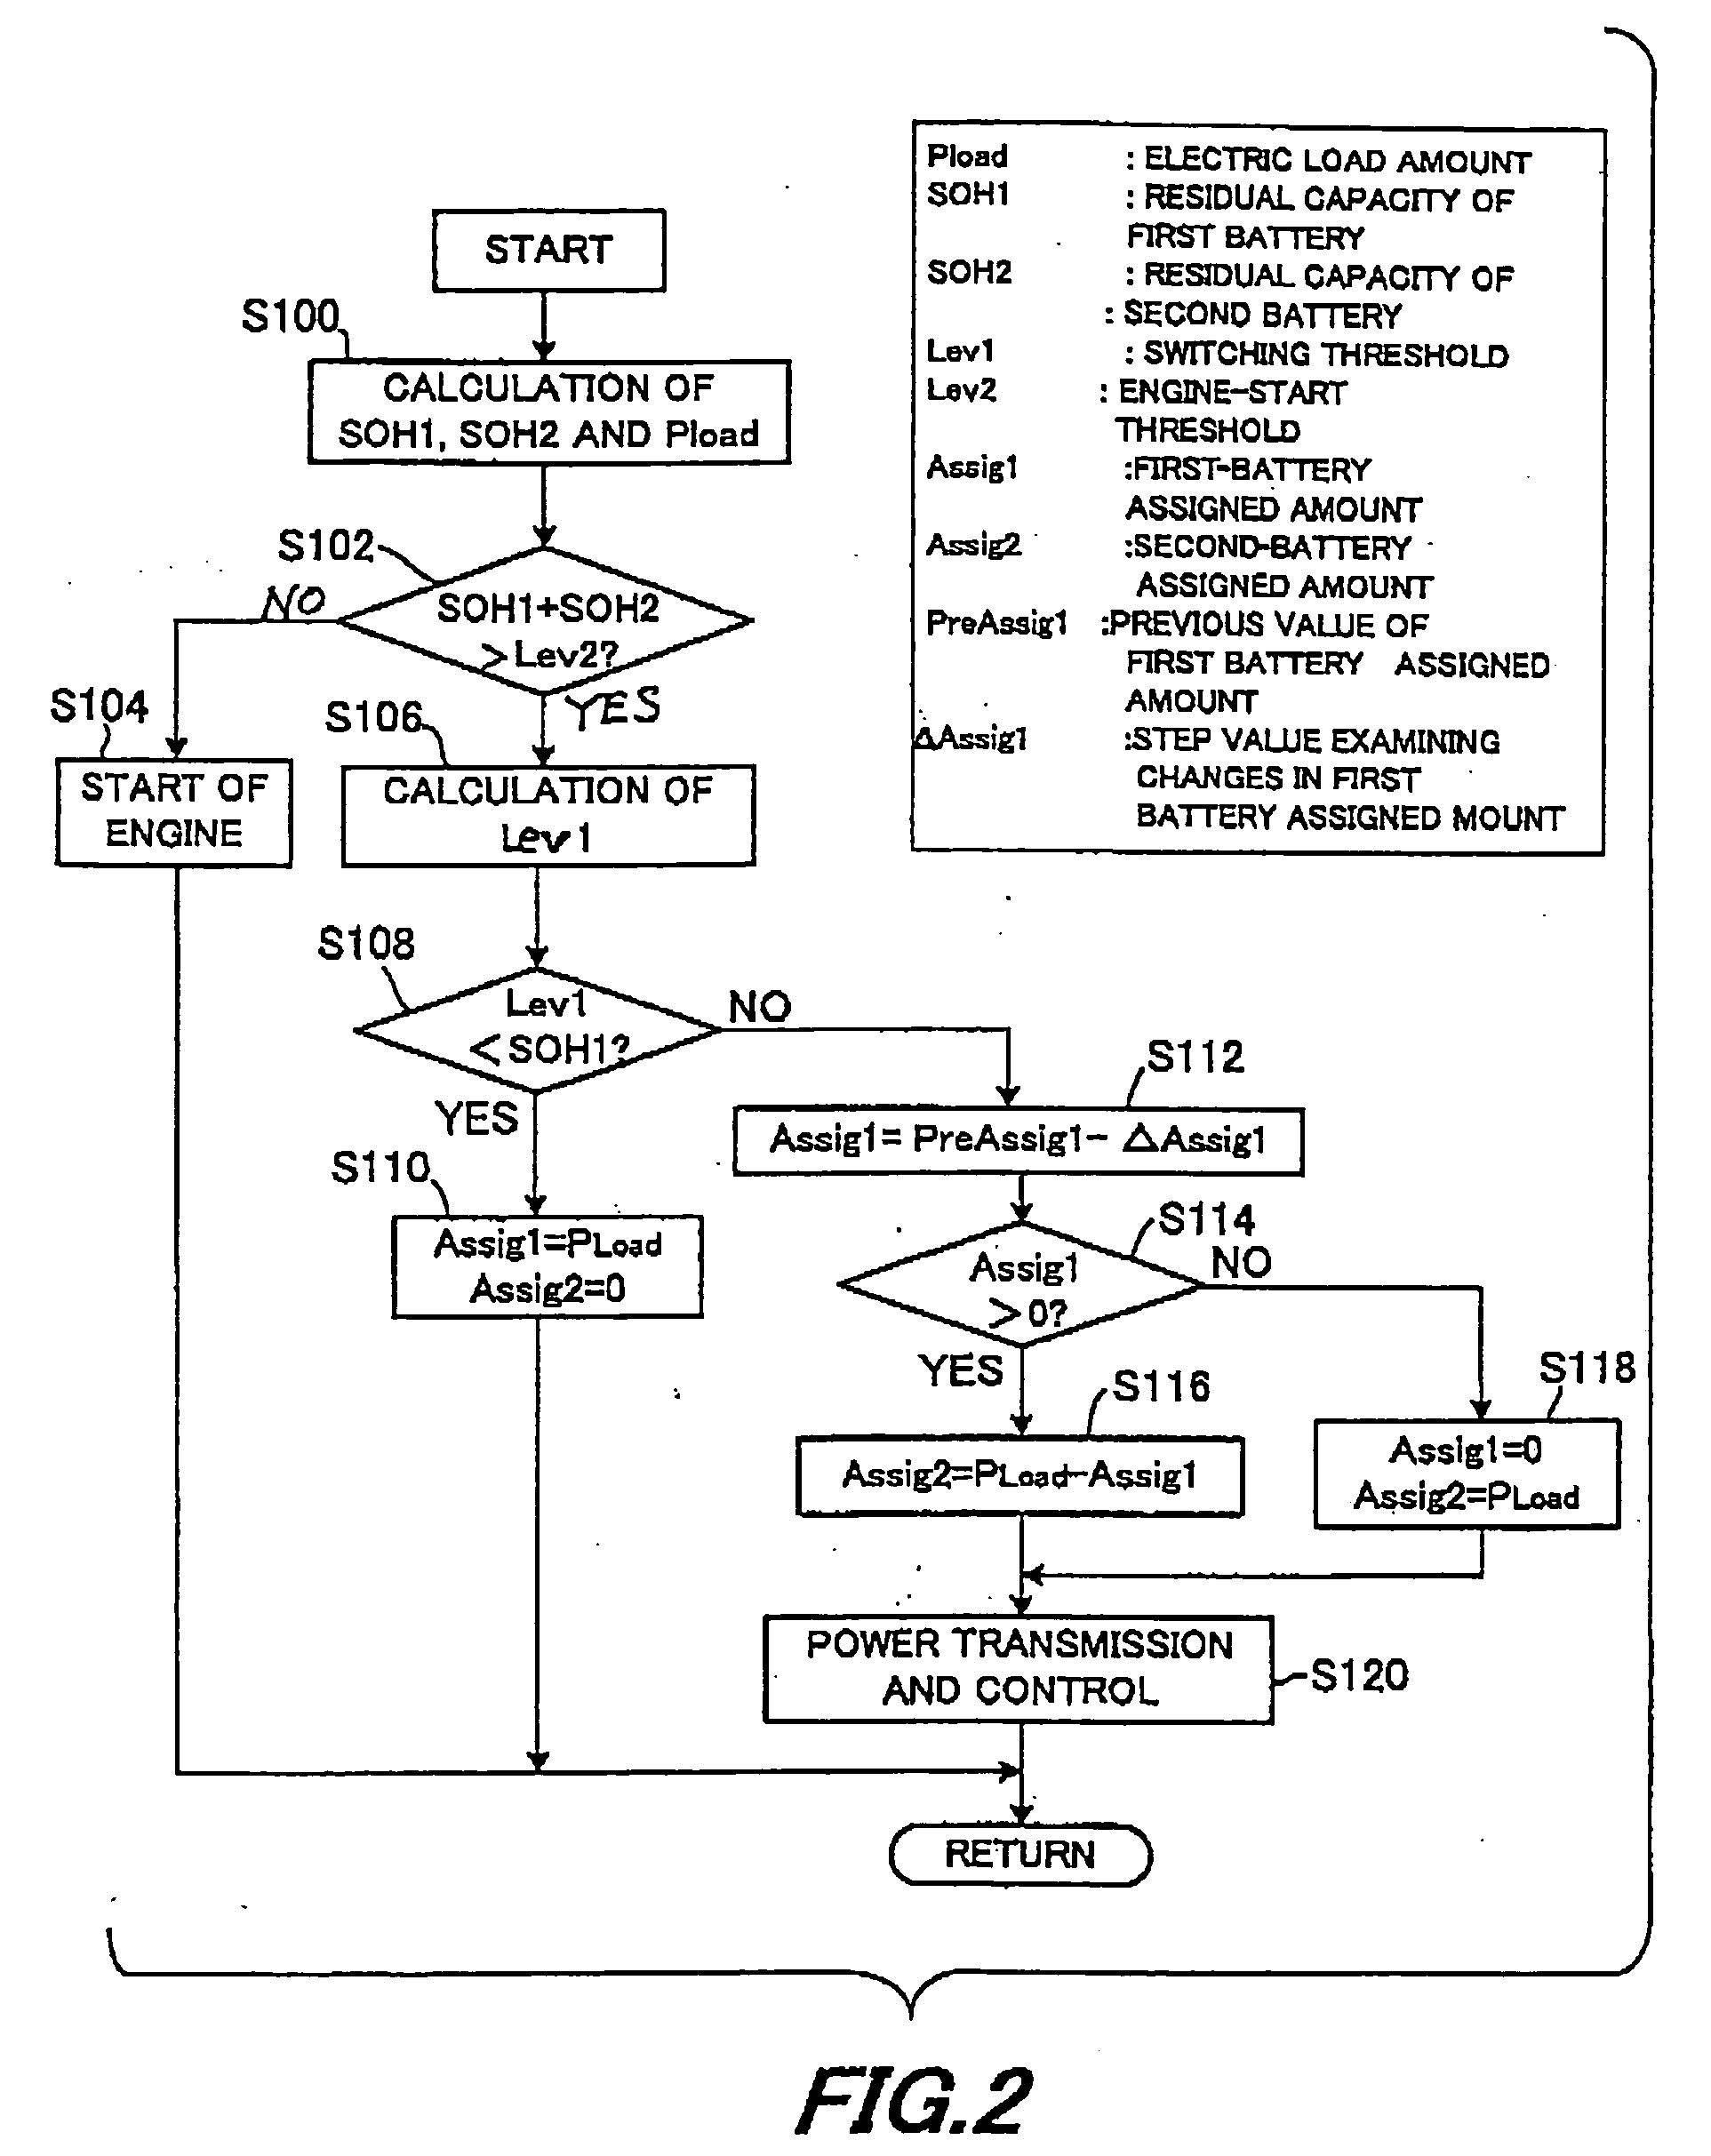 On-vehicle power supplying apparatus with two power supplies